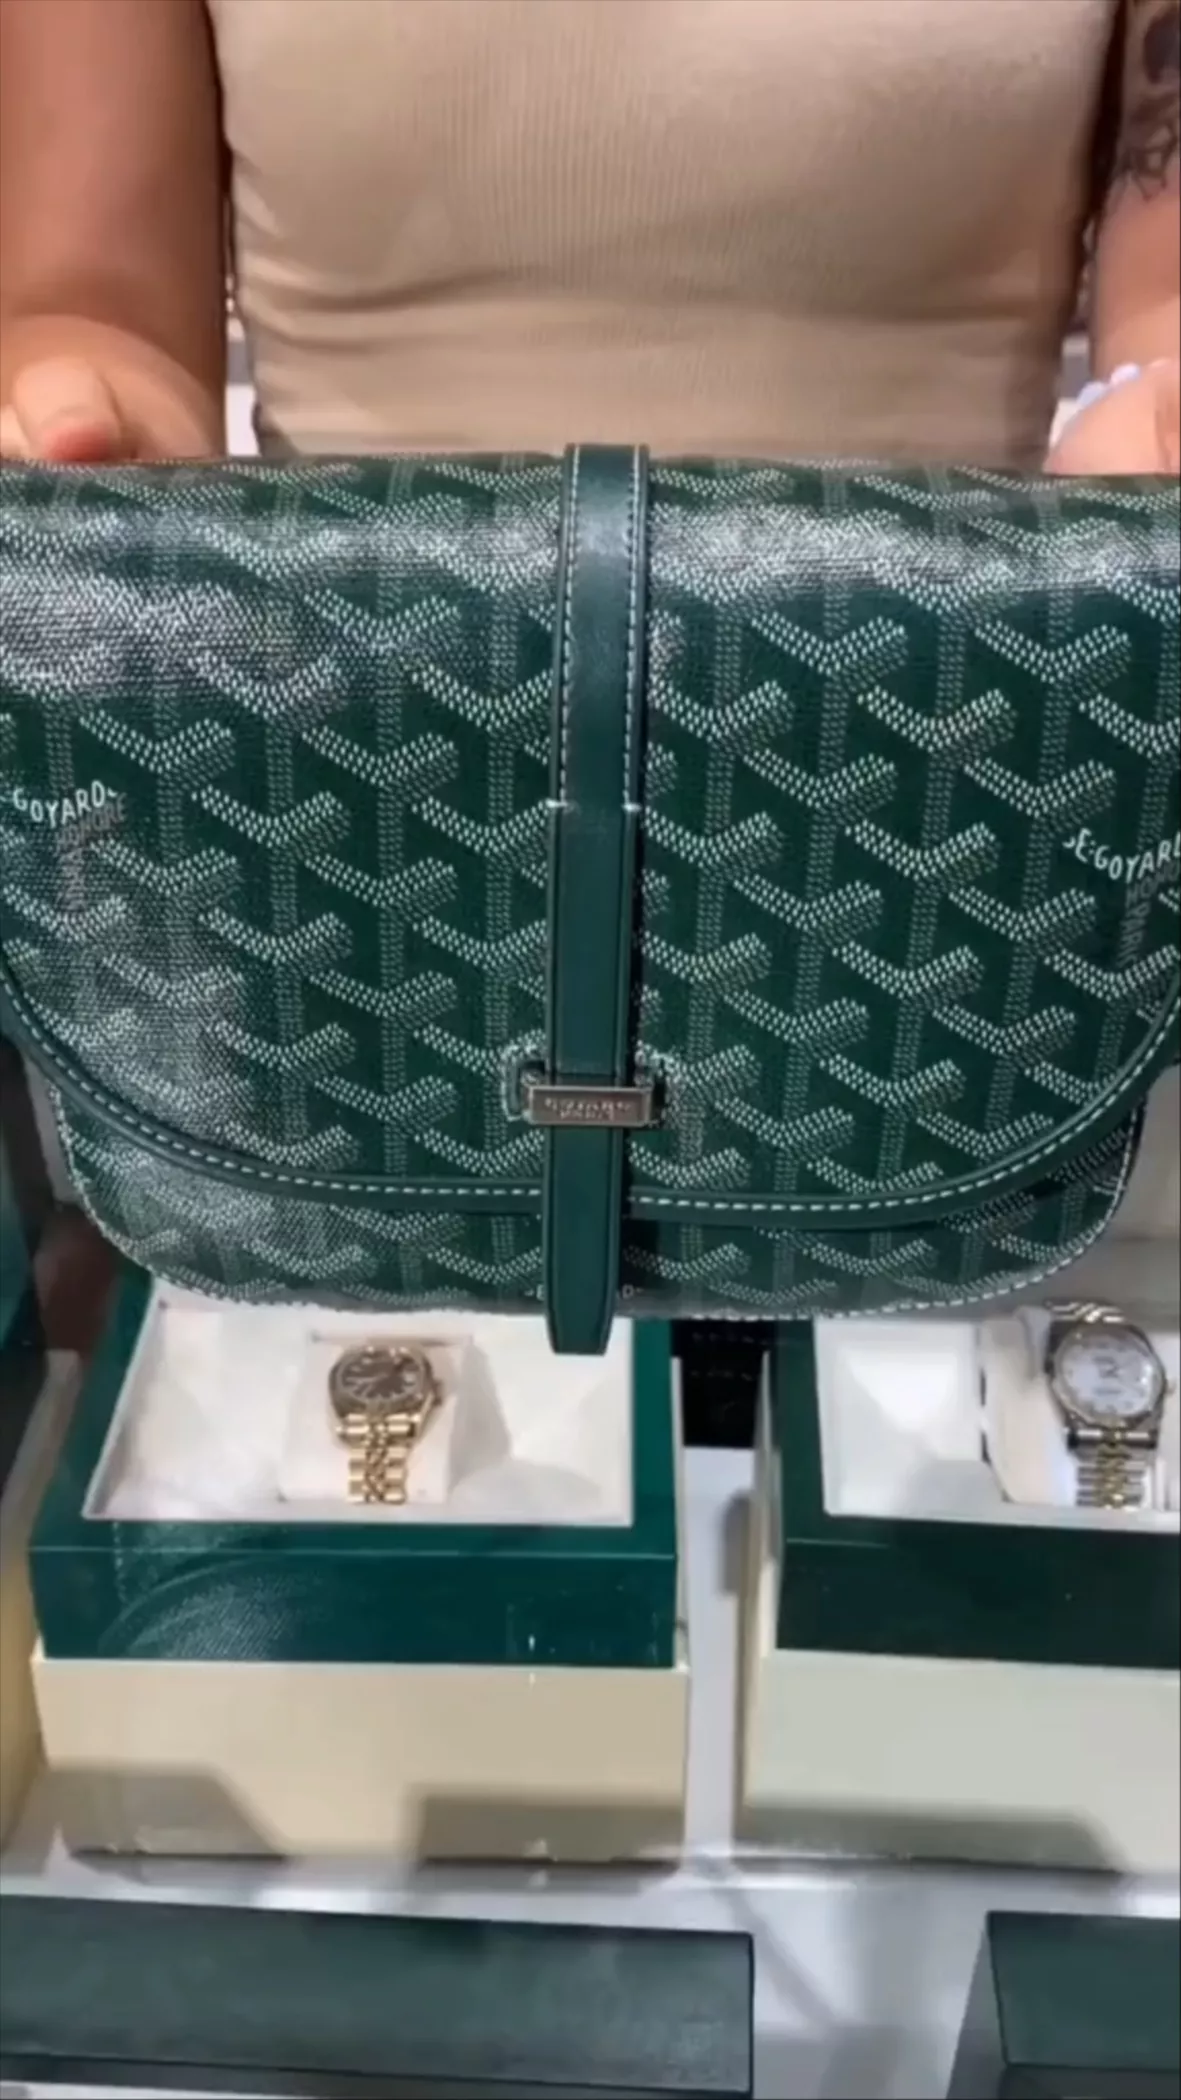 Goyard Tote with Dhgate Link!! 